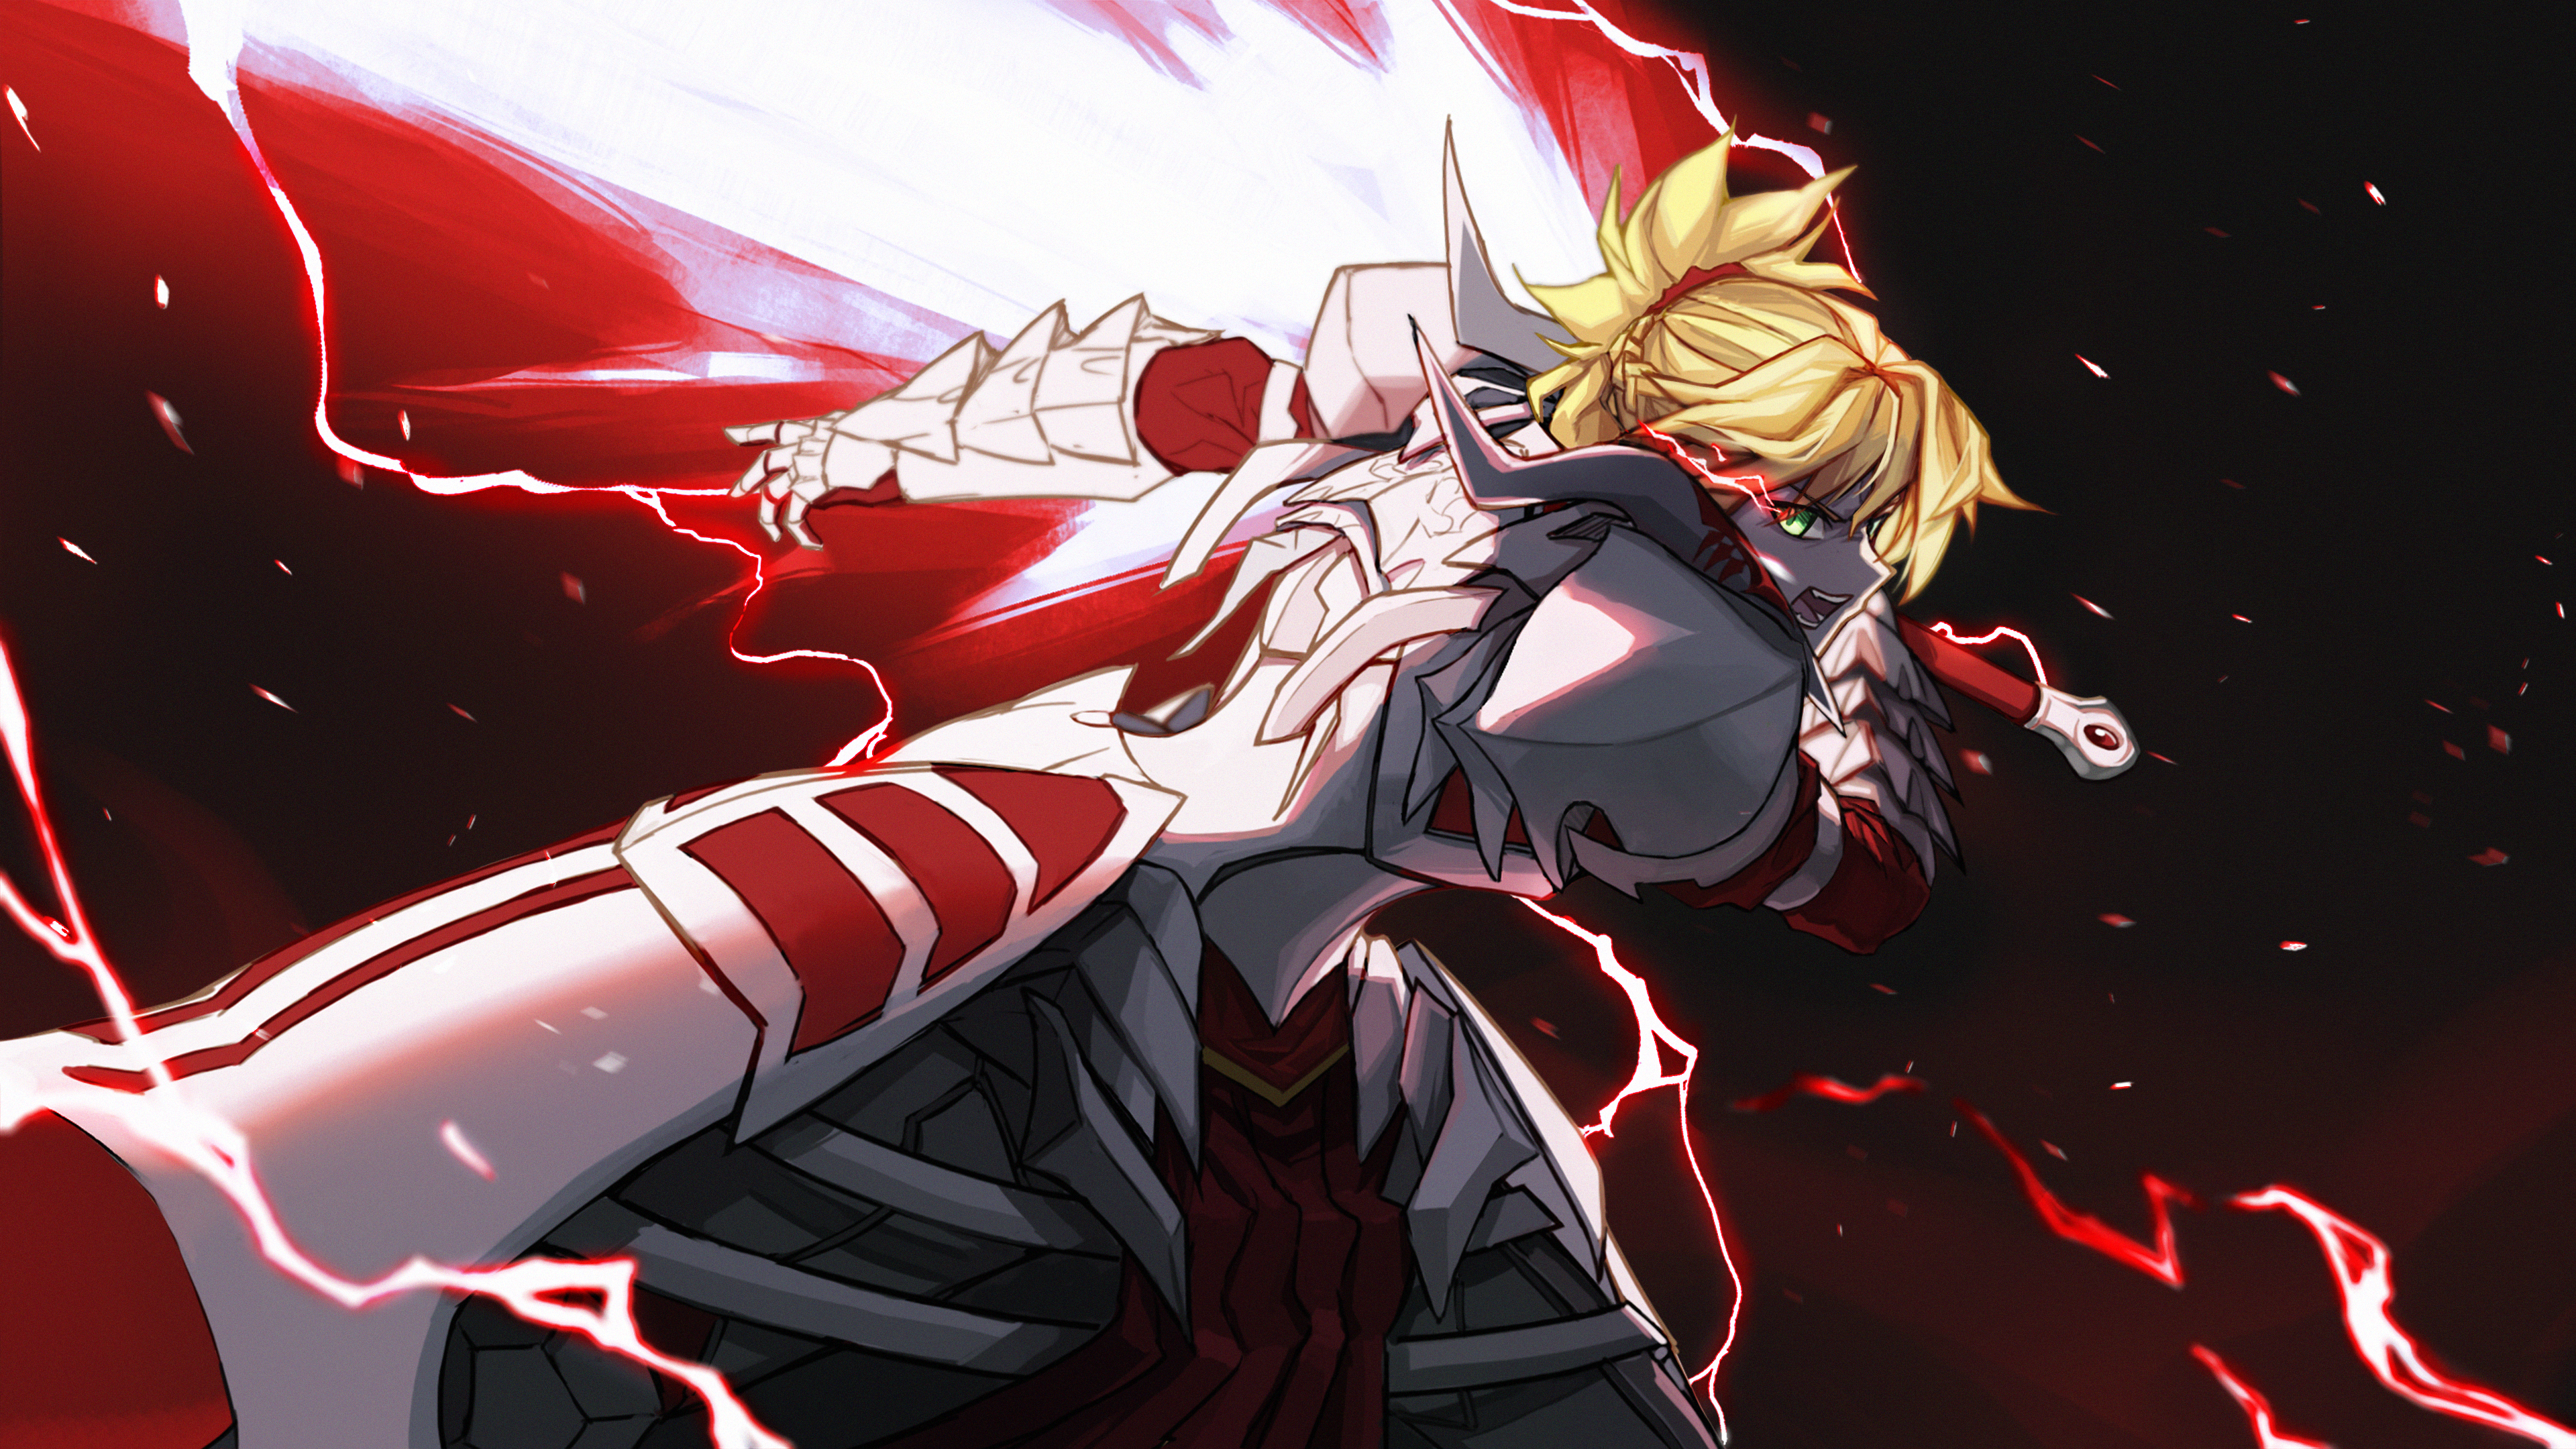 Anime 3840x2160 anime anime girls Fate series Fate/Apocrypha  Fate/Grand Order Mordred (Fate/Apocrypha) ponytail long hair blonde artwork digital art fan art